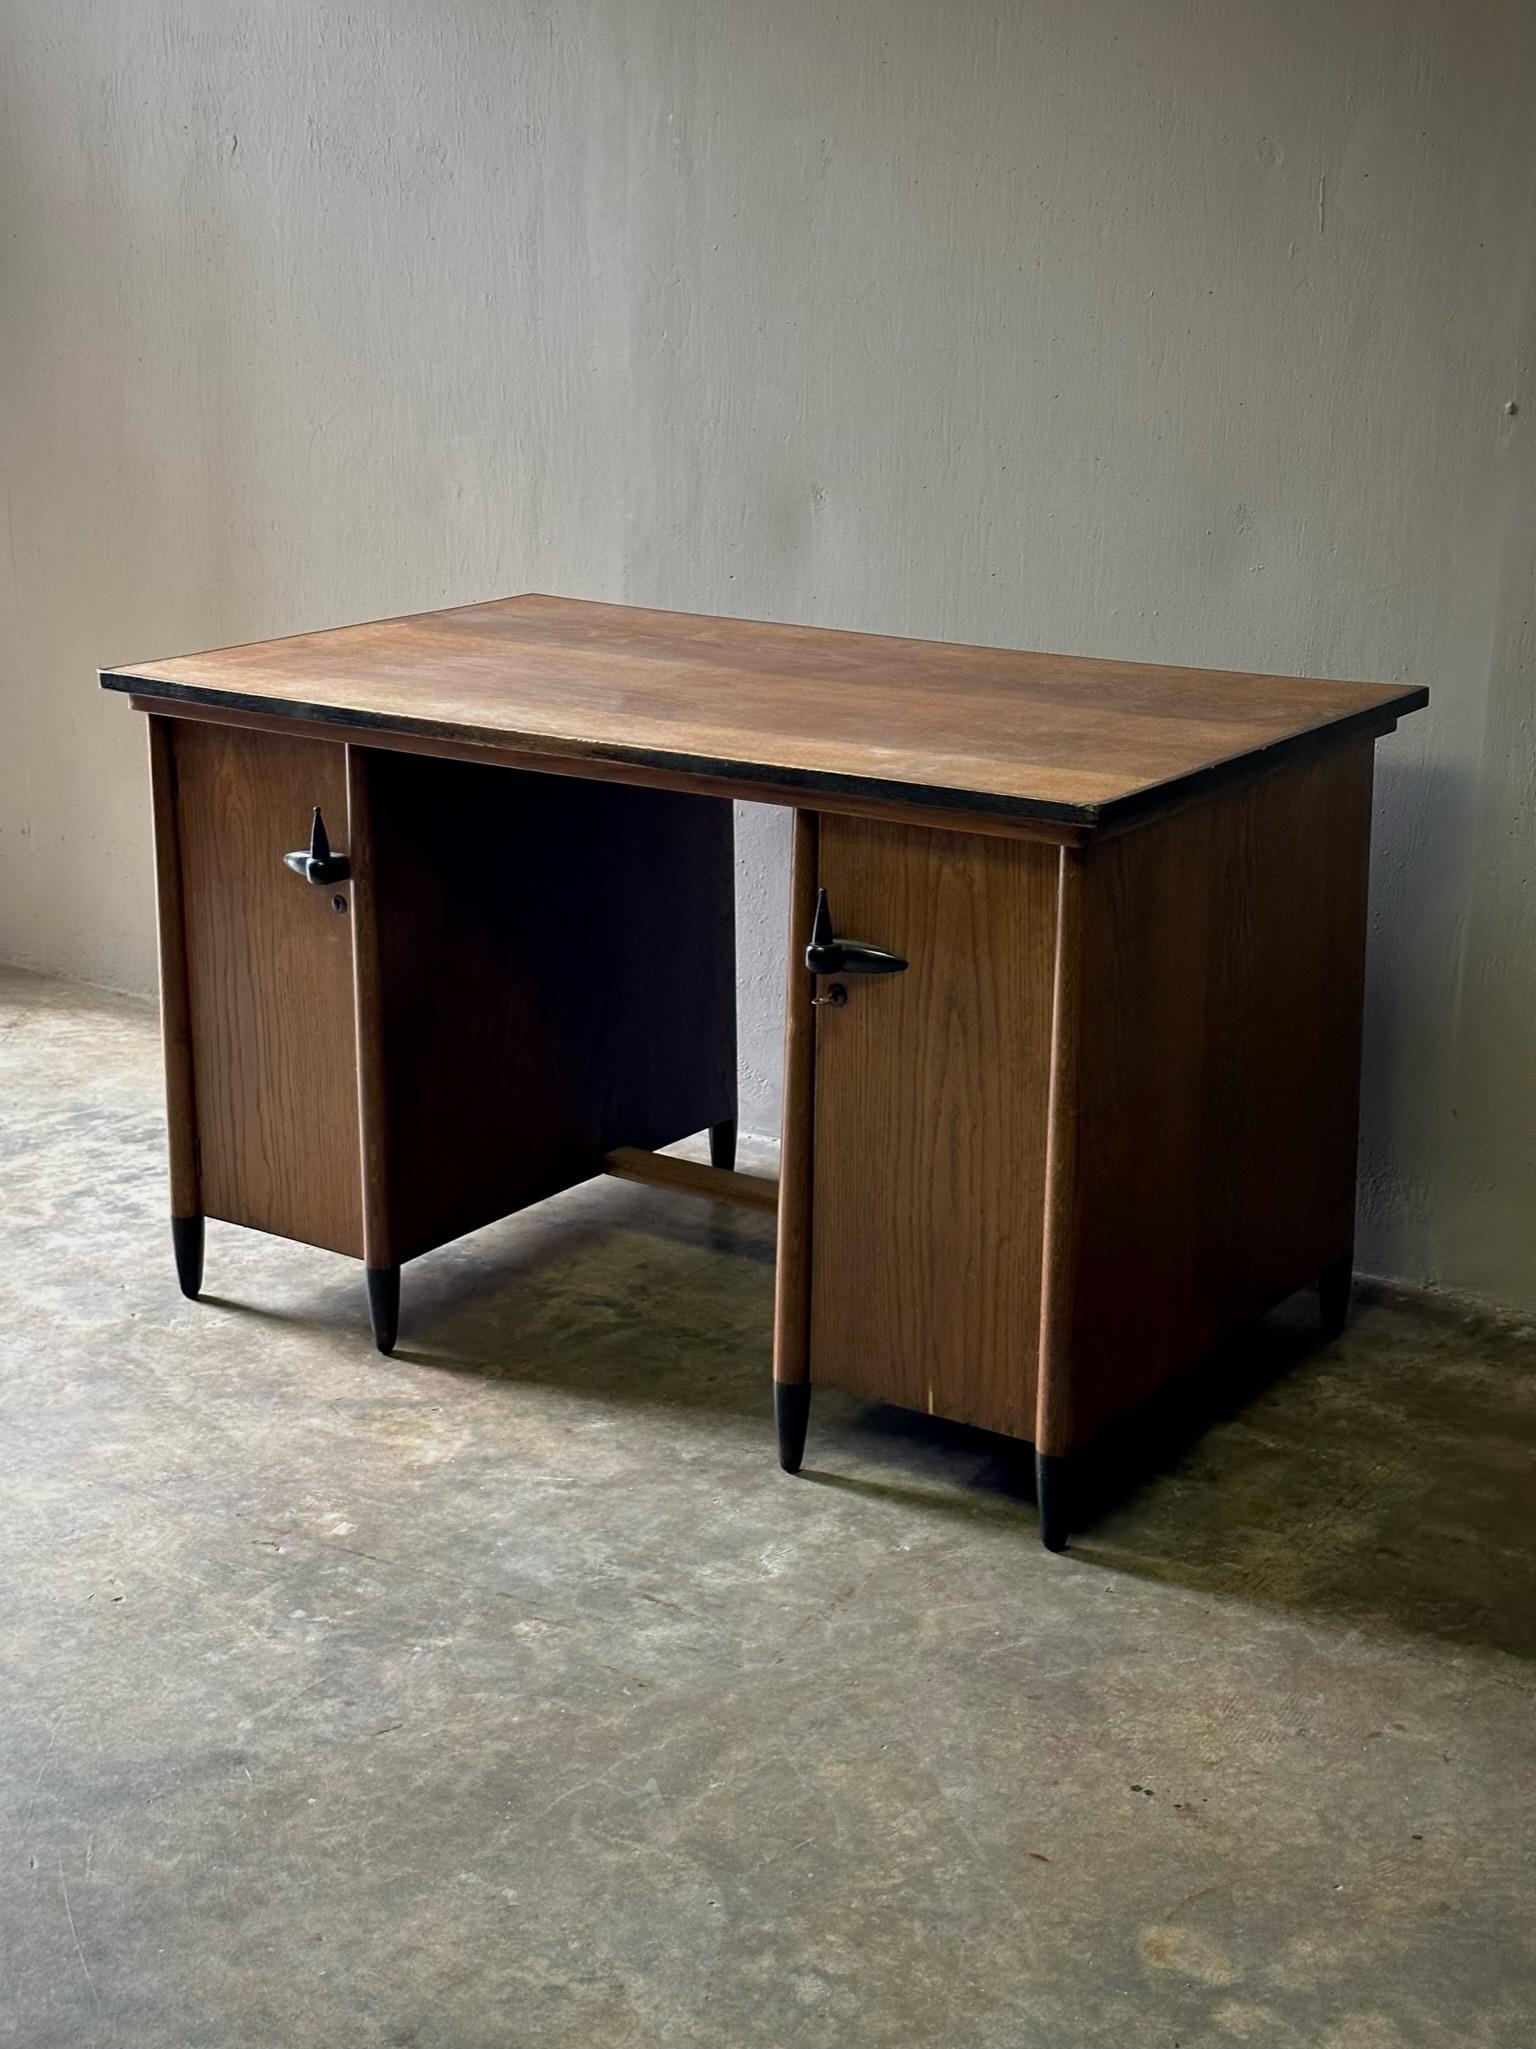 1920s Amsterdam School desk in oak designed by Willem Penaat for Metz and Co. An exquisite synthesis of utility and design with a sleek modernist silhouette and handsome, timeless appeal.

Netherlands, circa 1920

Dimensions: 49W x 30D x 29.5H 